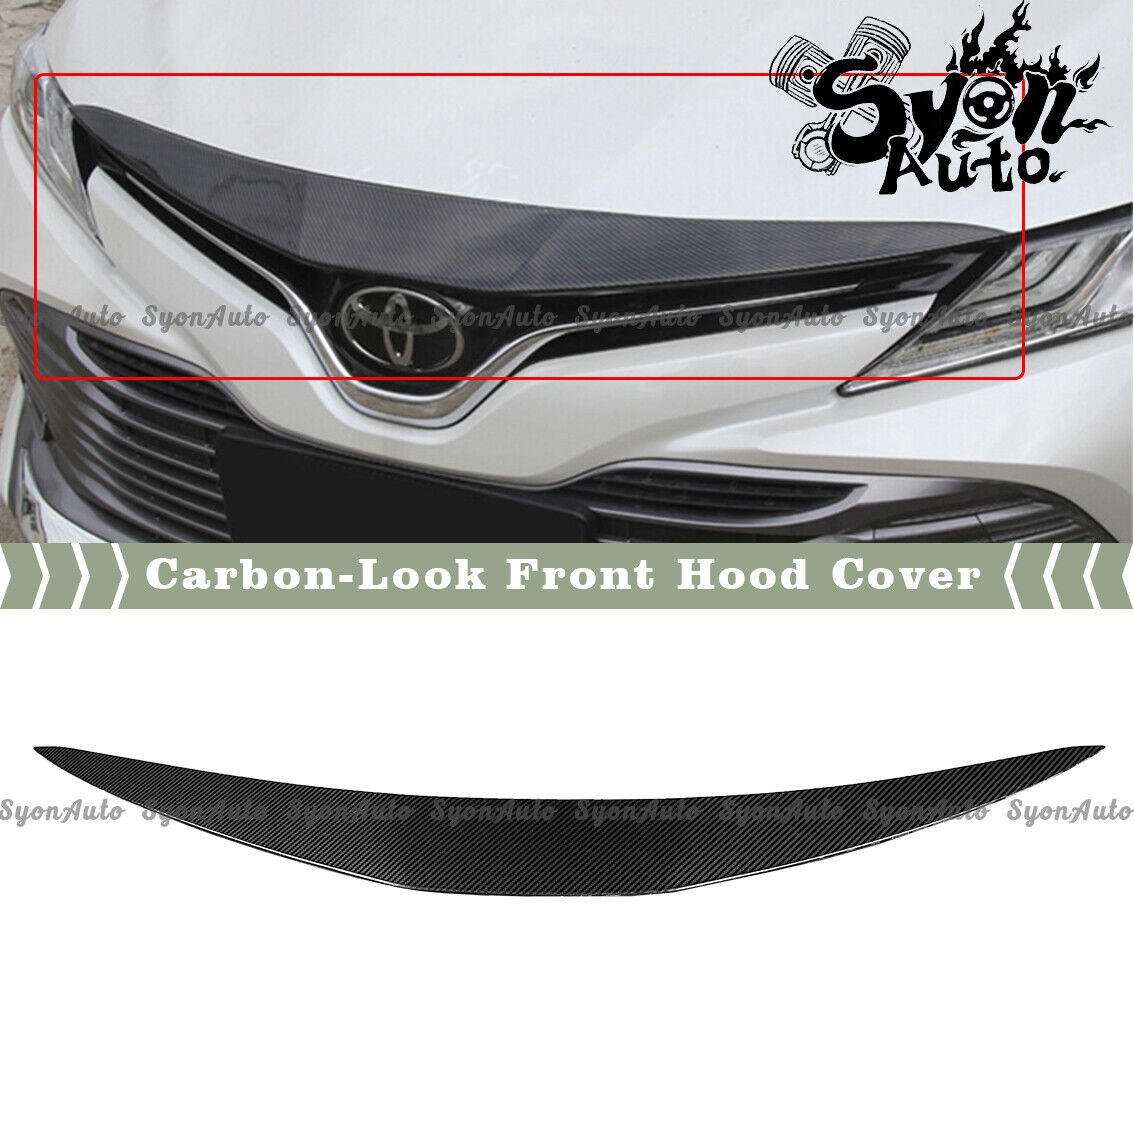 FITS 18-2020 TOYOTA CAMRY CARBON-LOOK FRONT BUMPER HOOD GRILL TRIM COVER GARNISH